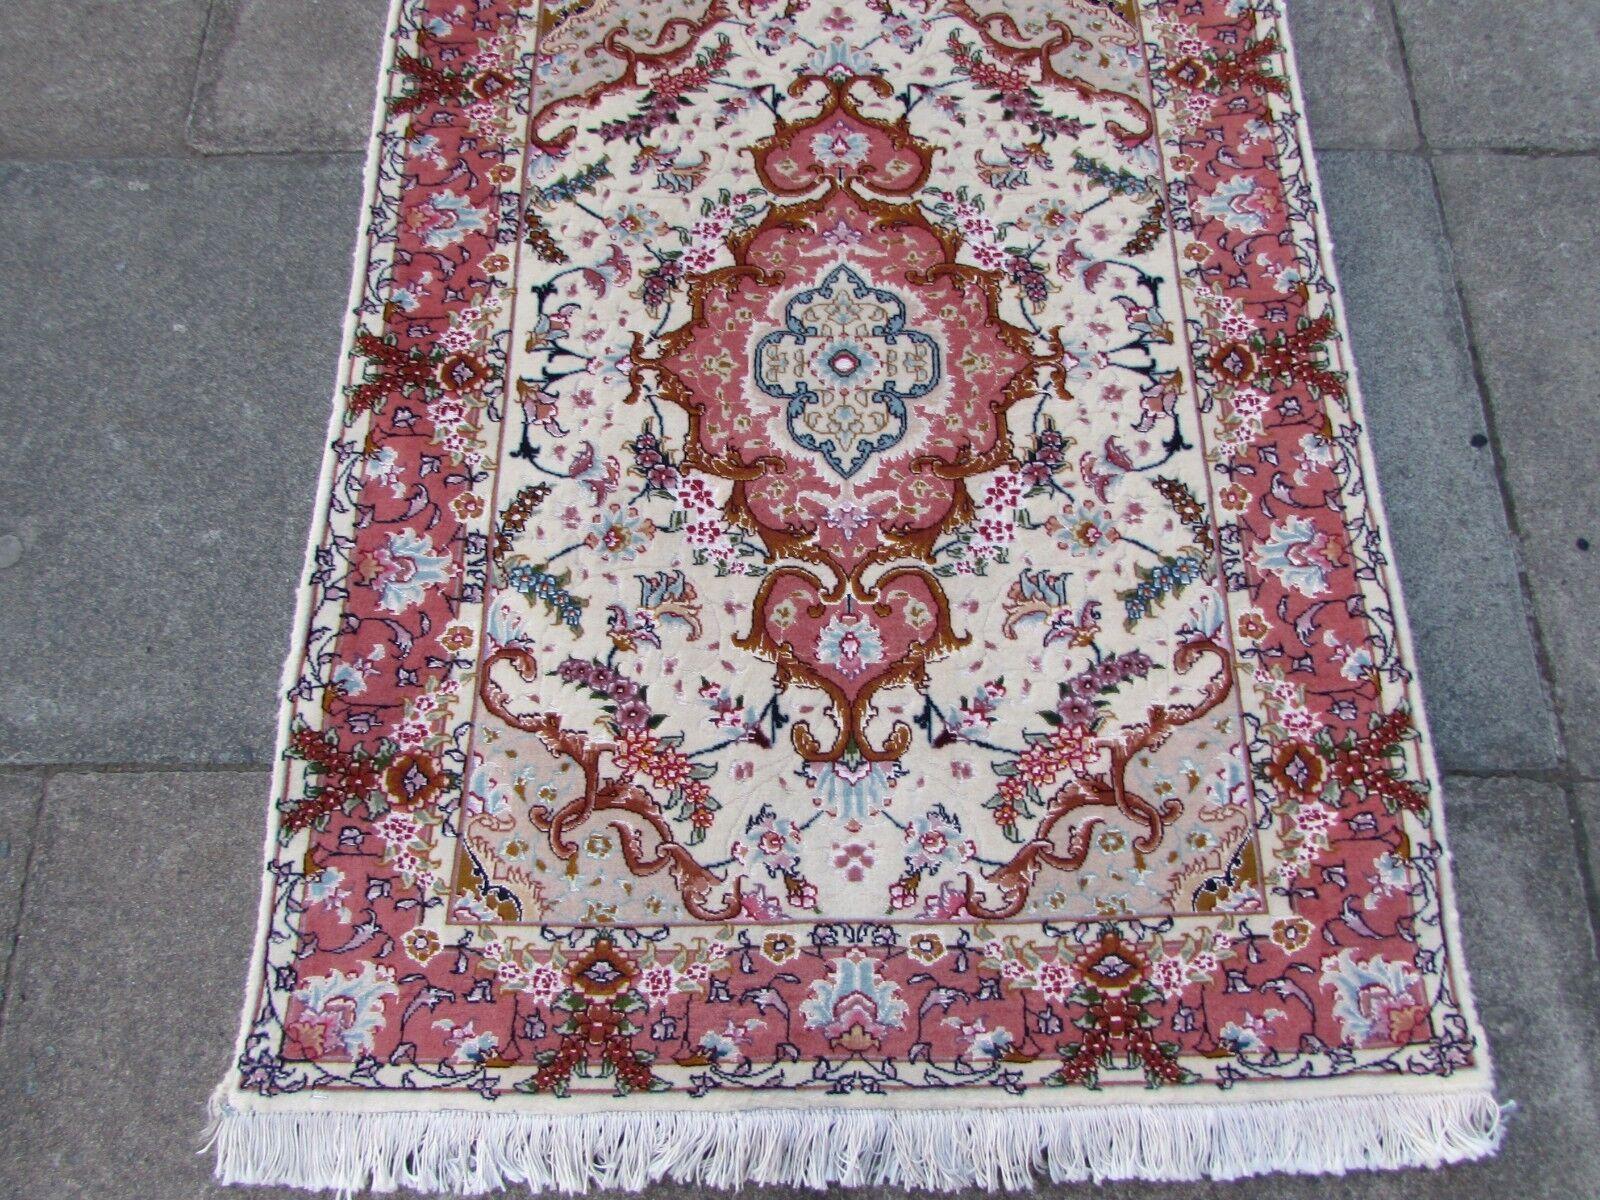 Hand-Knotted Handmade Vintage Persian Style Tabriz Runner Silk Rug 2.9' x 9.8', 1980s, 1Q49 For Sale